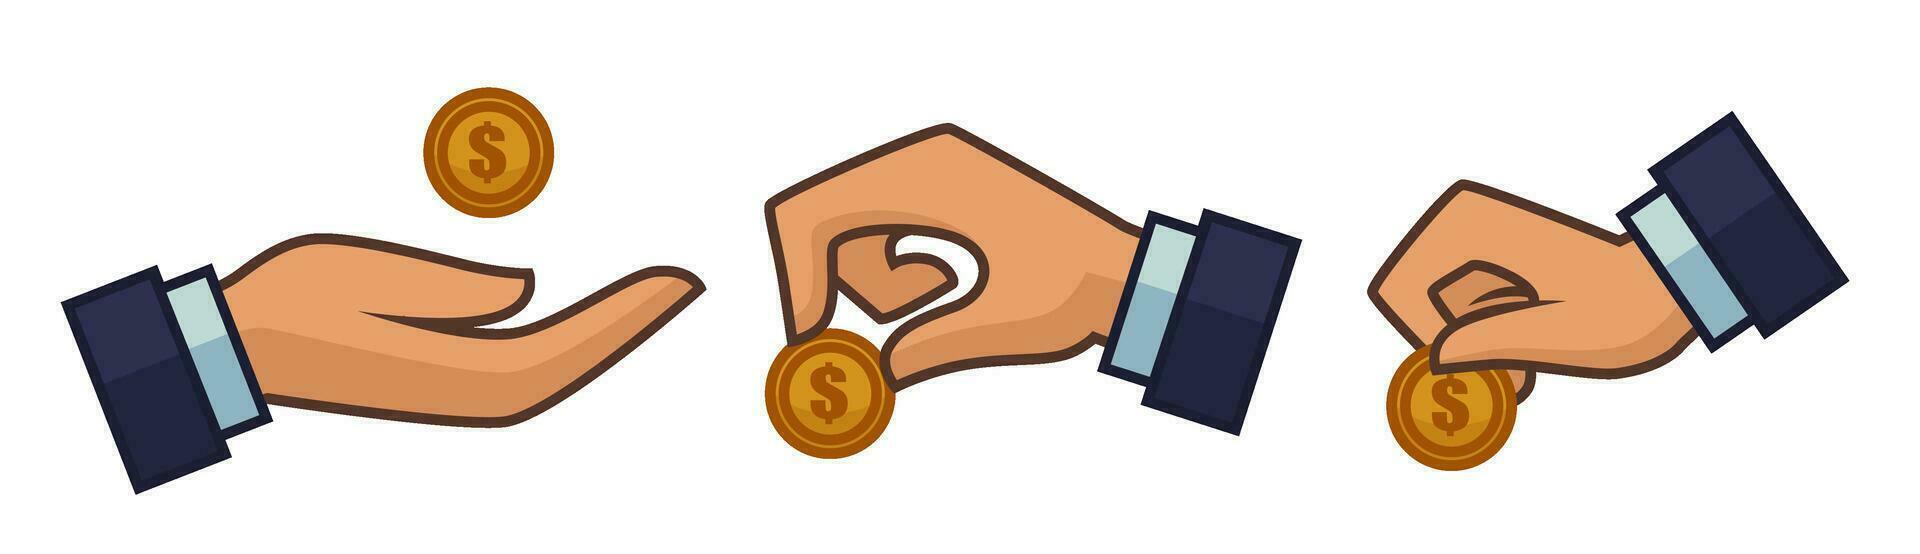 Hand giving or taking coin, dollar cash or tips vector